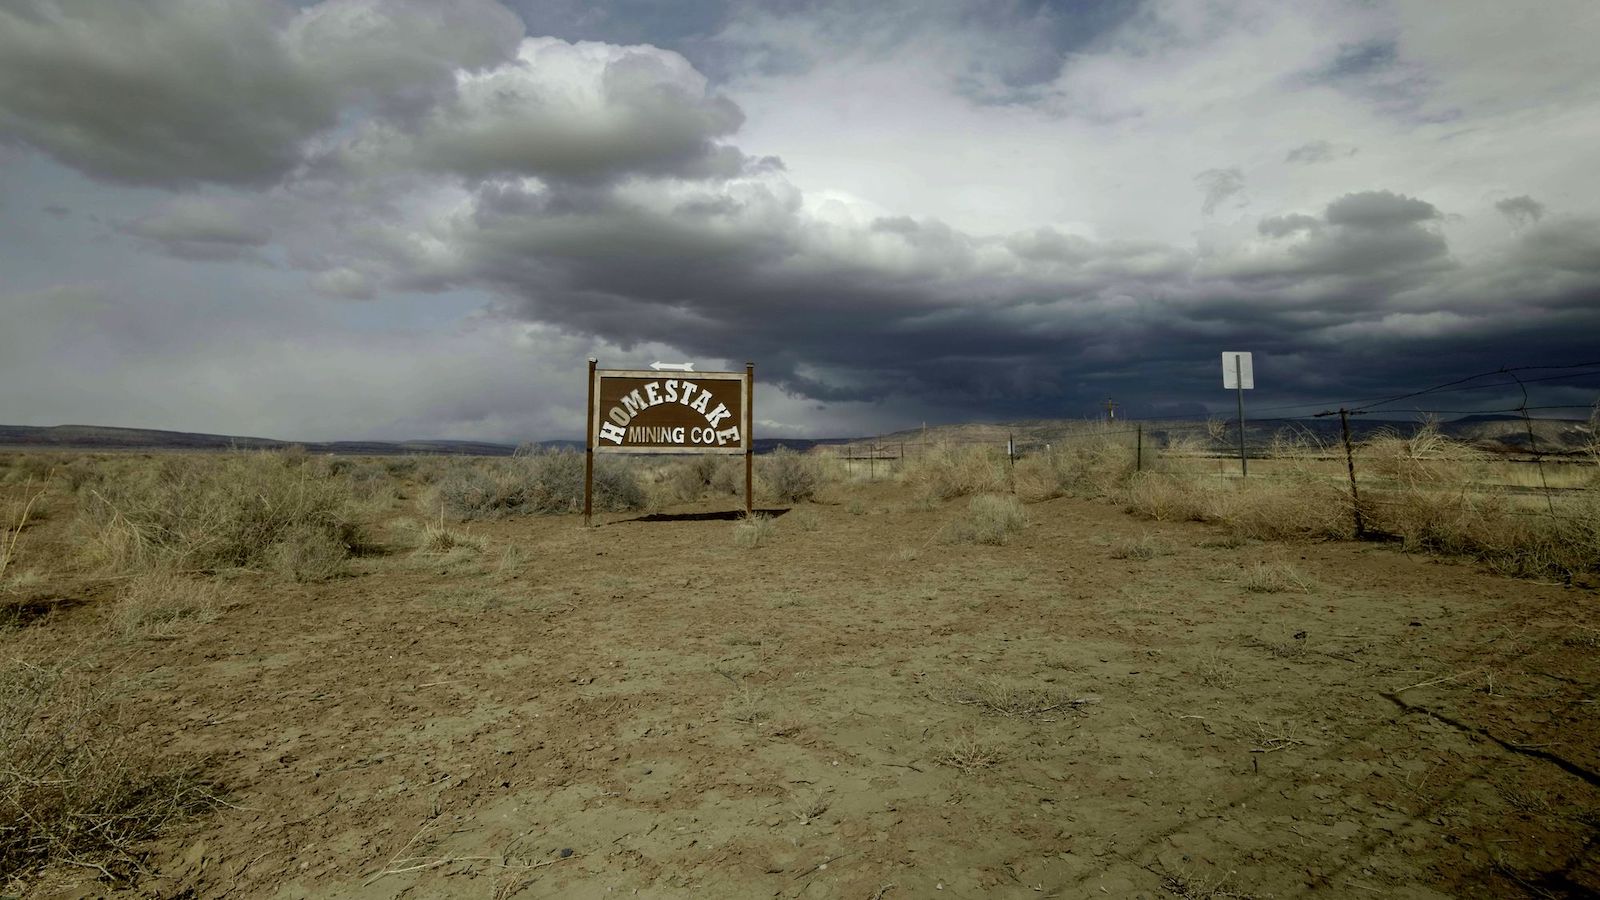 A Uranium ghost town in the making